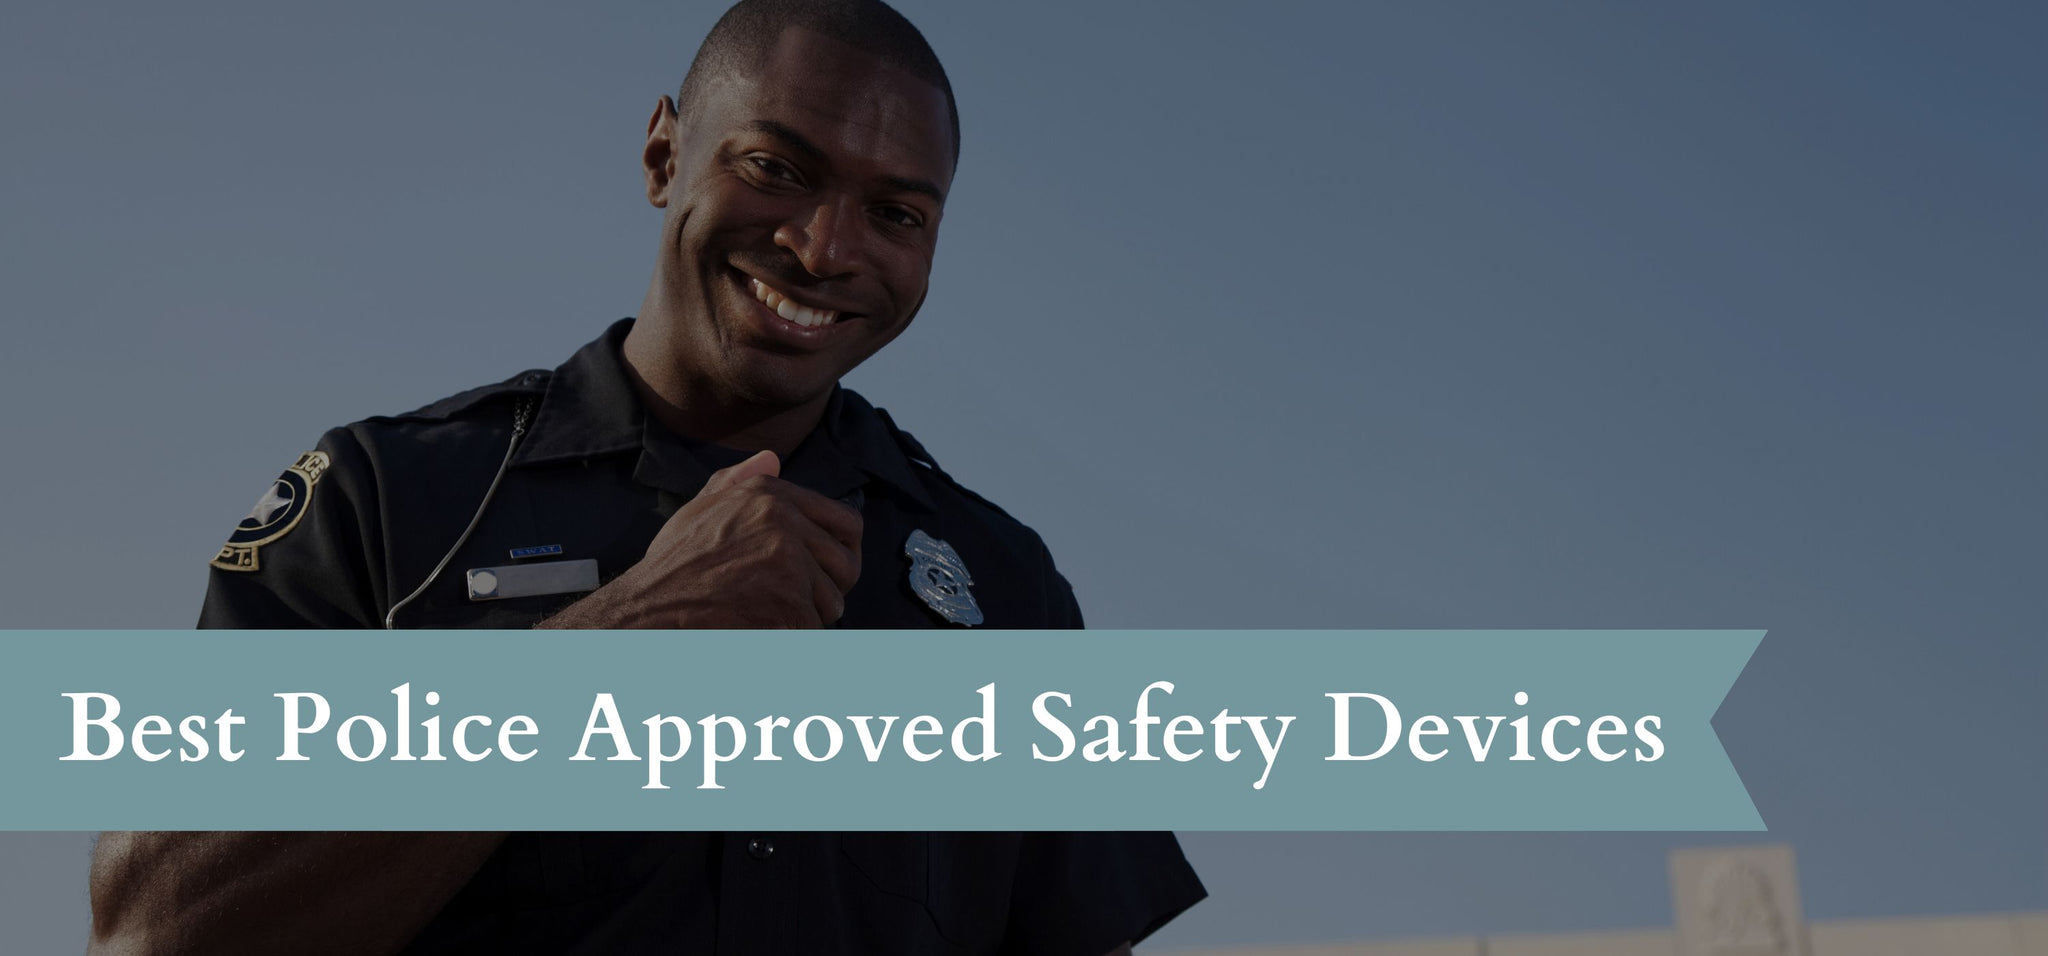 Best Personal Safety Devices Recommended by Police - PersonalSafetyHub